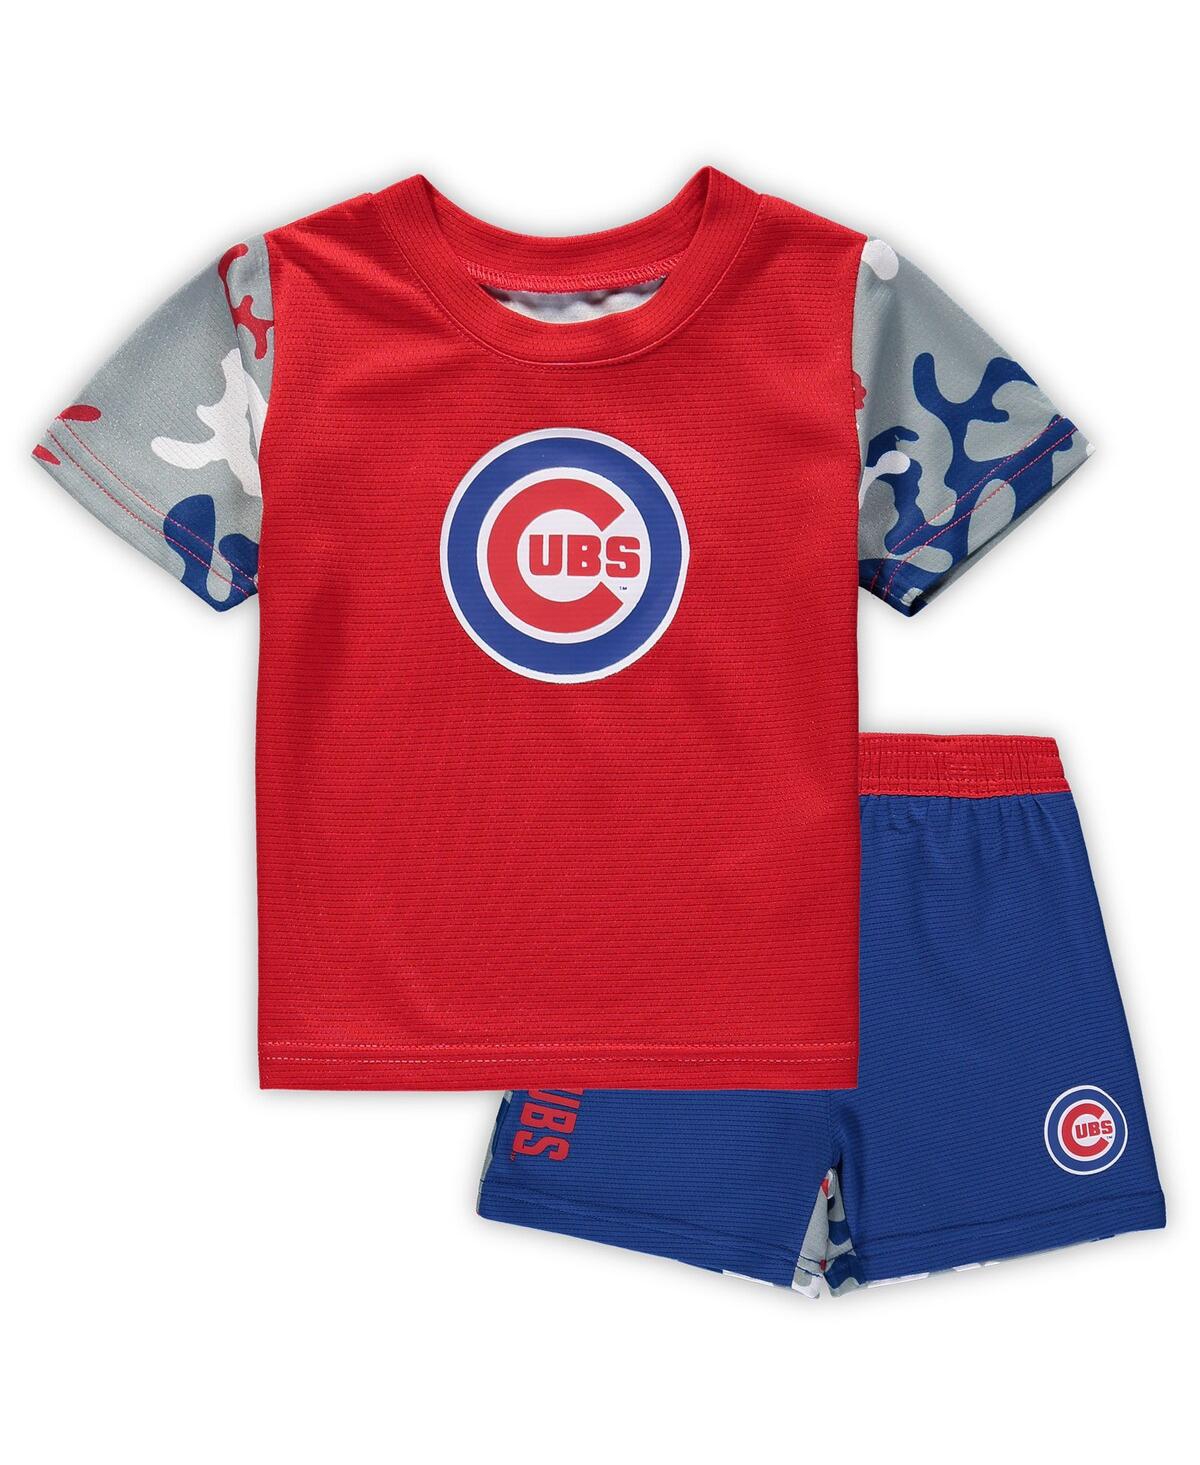 Outerstuff Babies' Newborn And Infant Boys And Girls Royal, Red Chicago Cubs Pinch Hitter T-shirt And Shorts Set In Royal,red